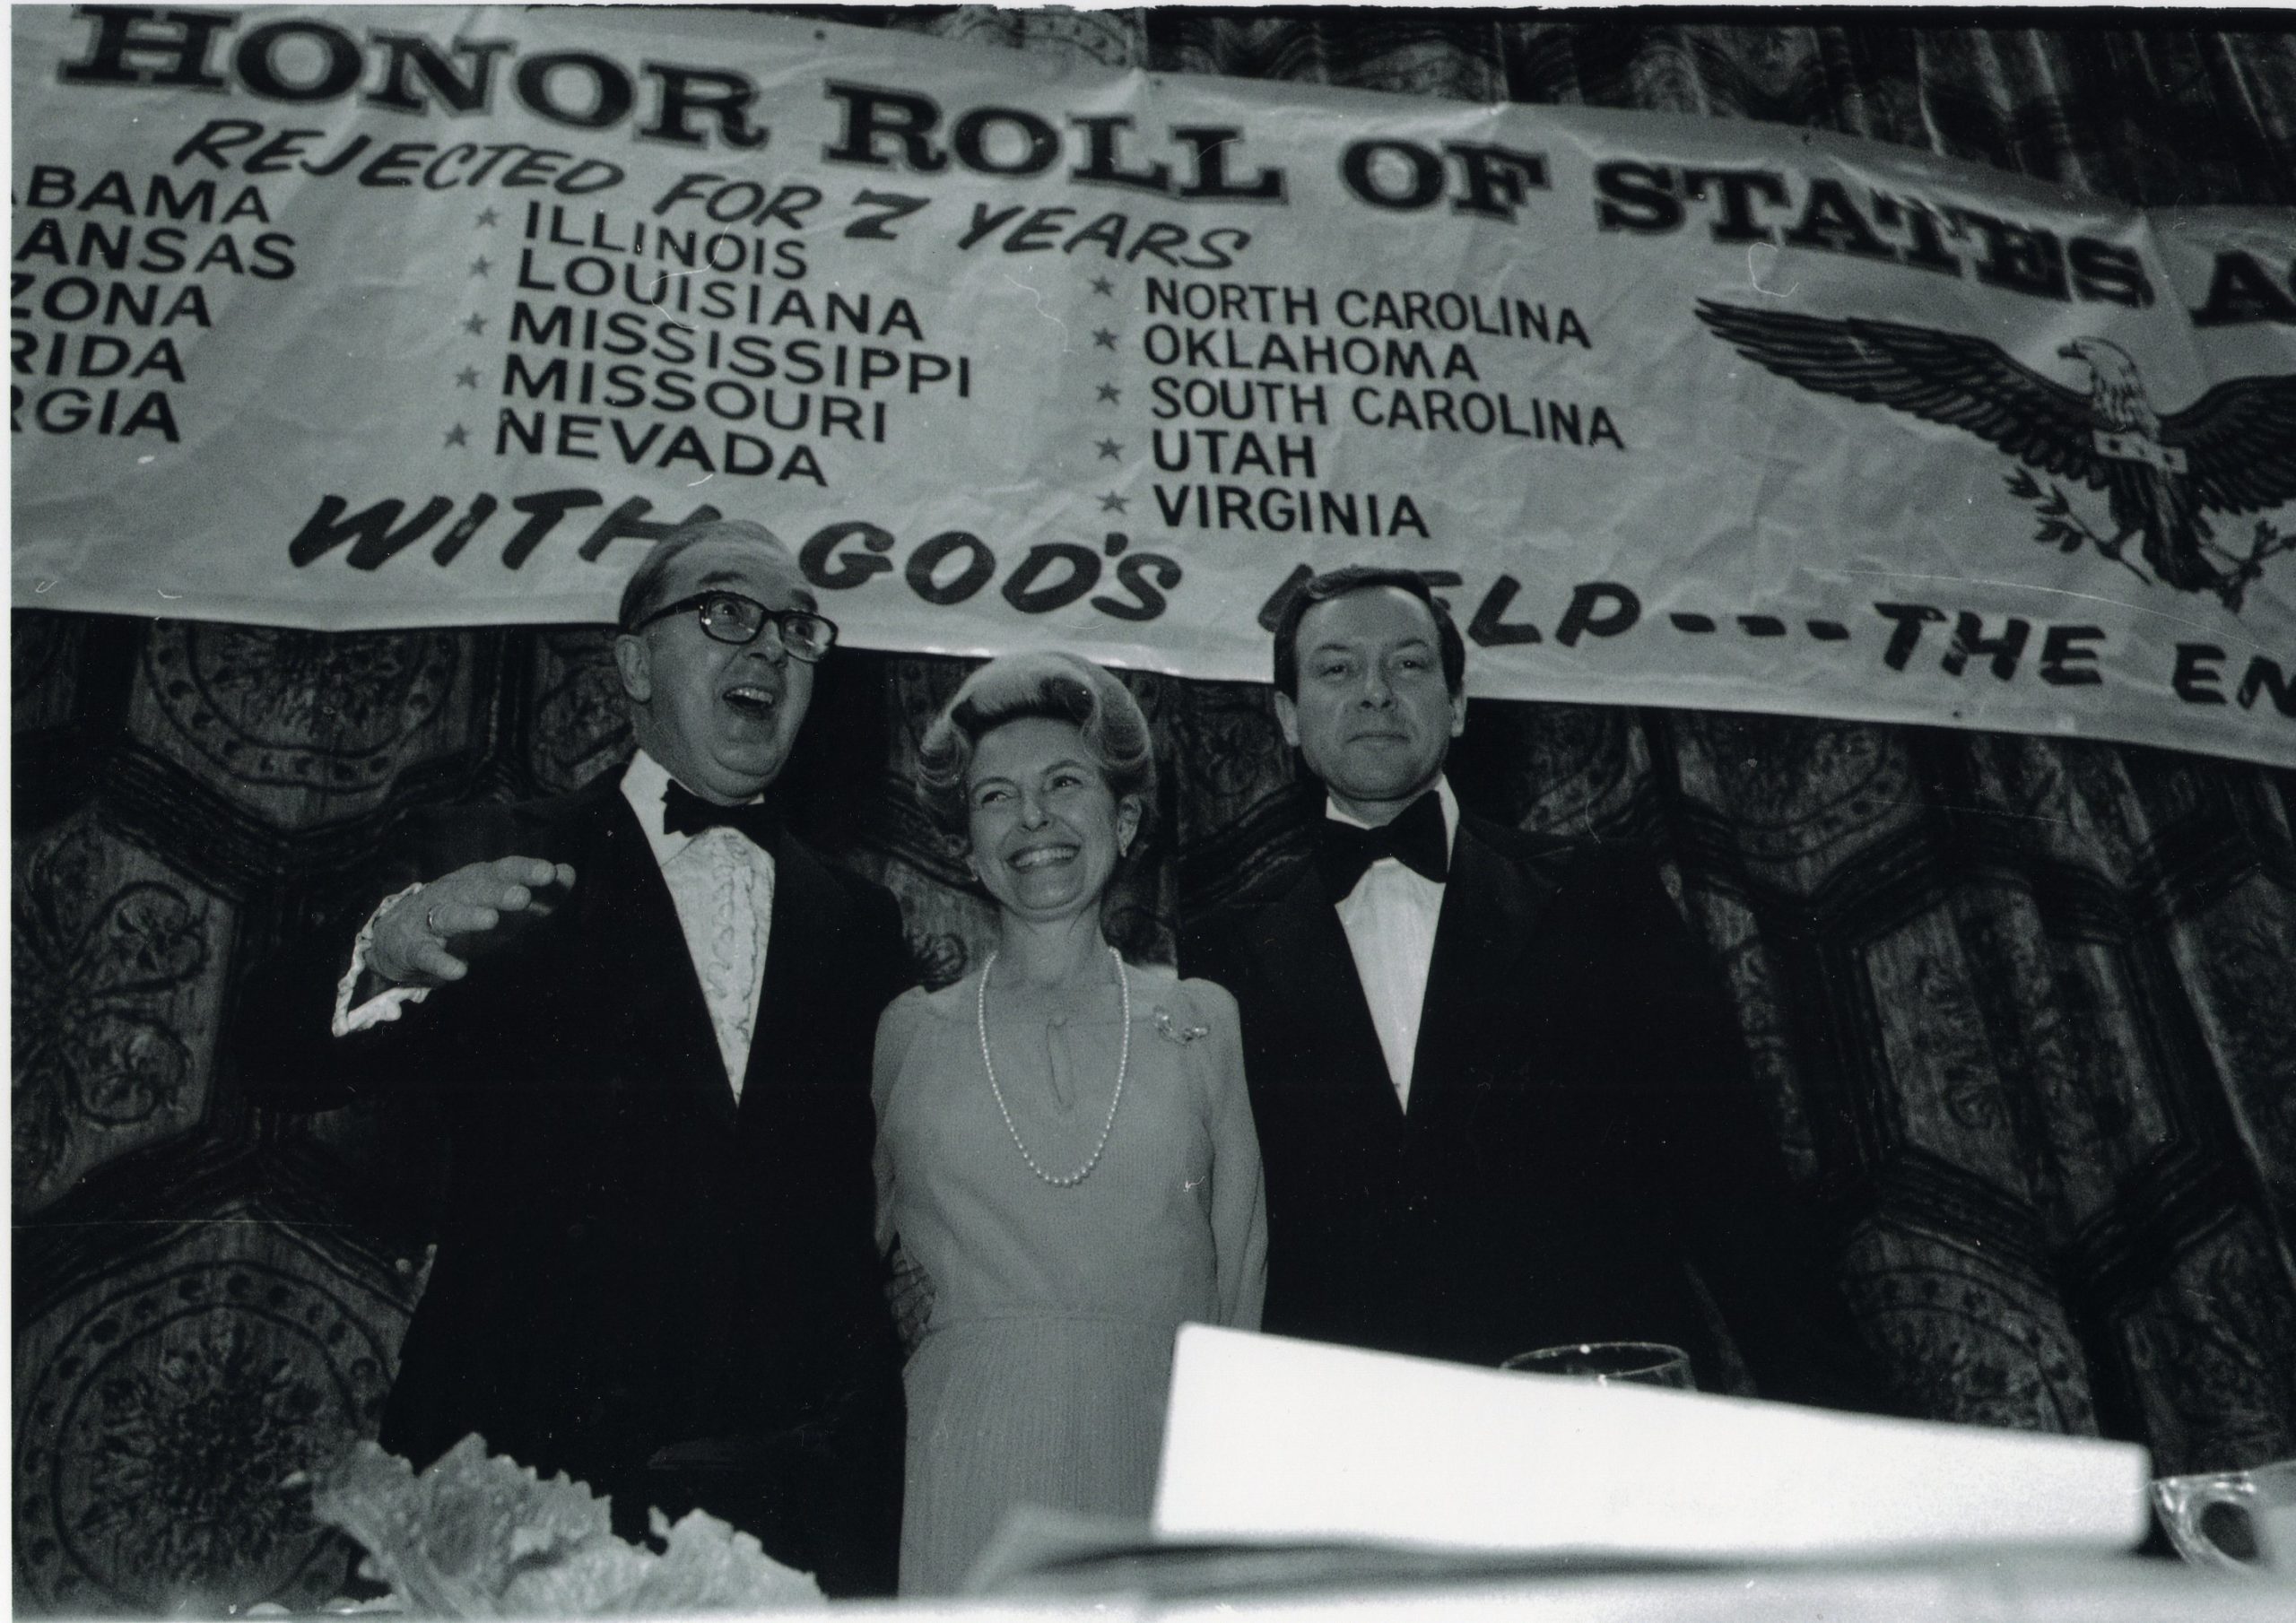 celebration of the official end of the ERA, March 22, 1979 with Phyllis Schlafly, Jesse Helms and Orrin Hatch